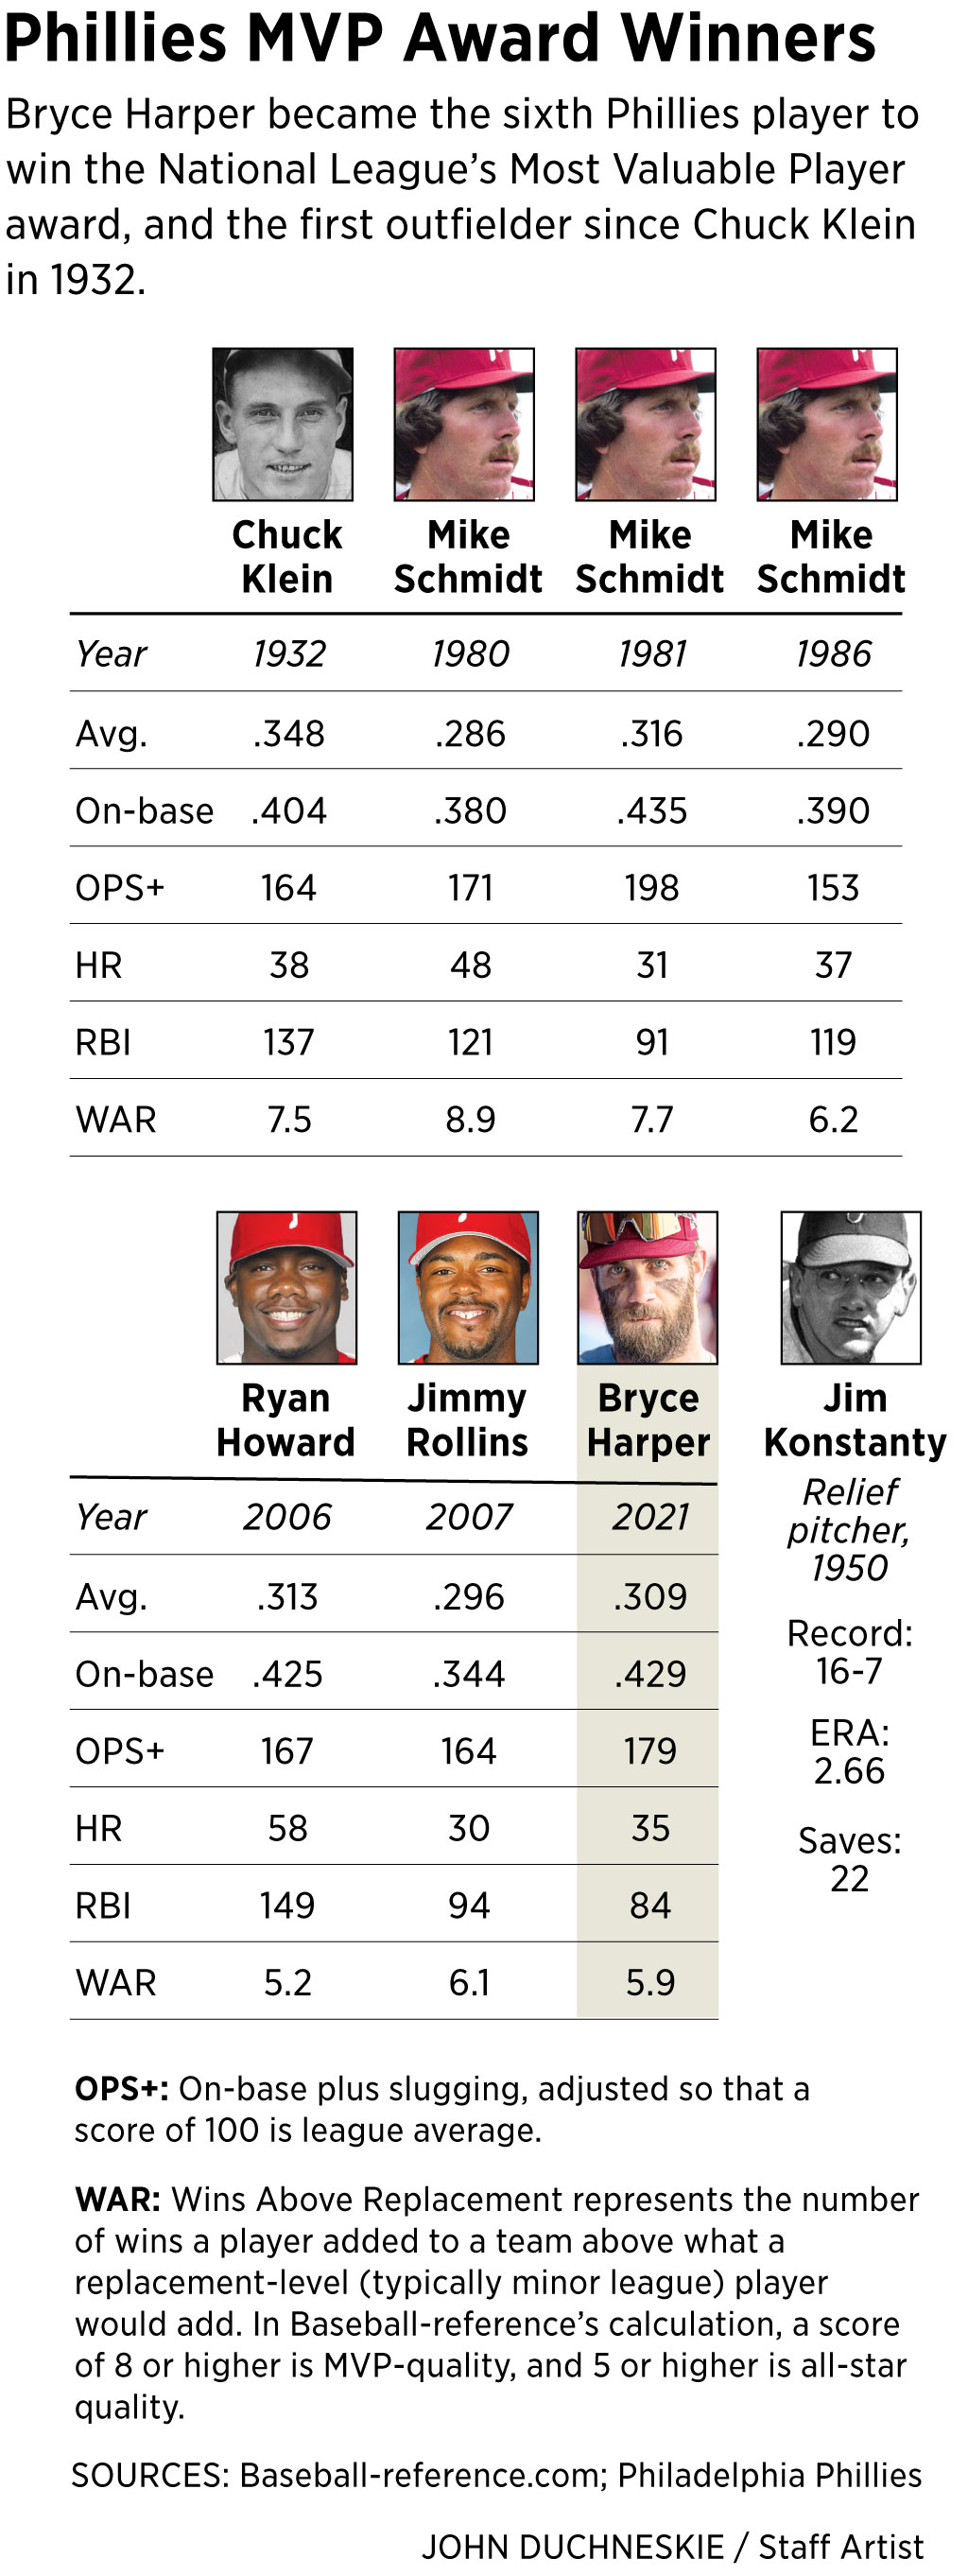 Bryce Harper May Be the Most Hyped—and Underrated—Player in Baseball - WSJ